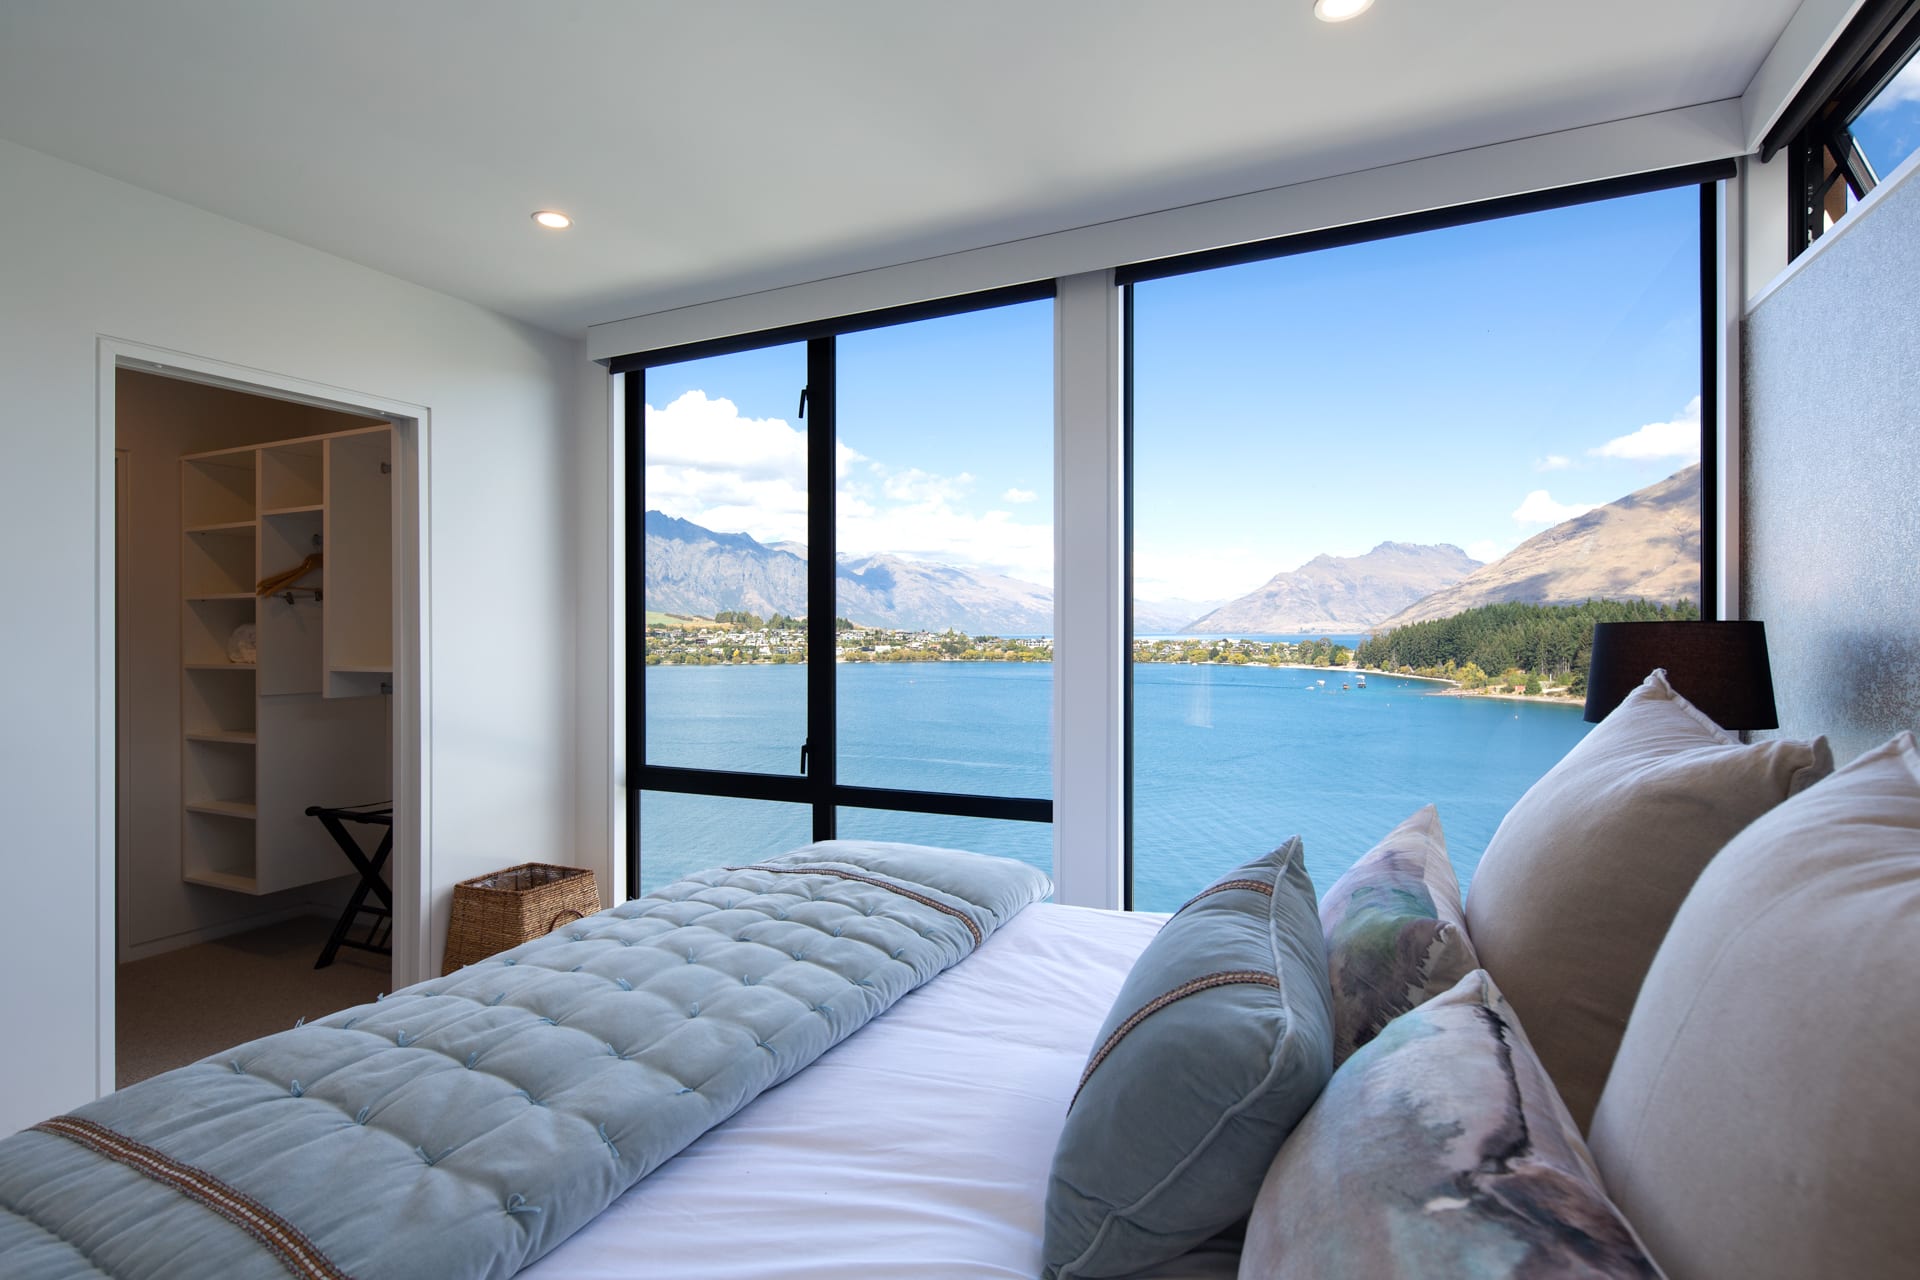 Bedroom 2 with stunning mountain views